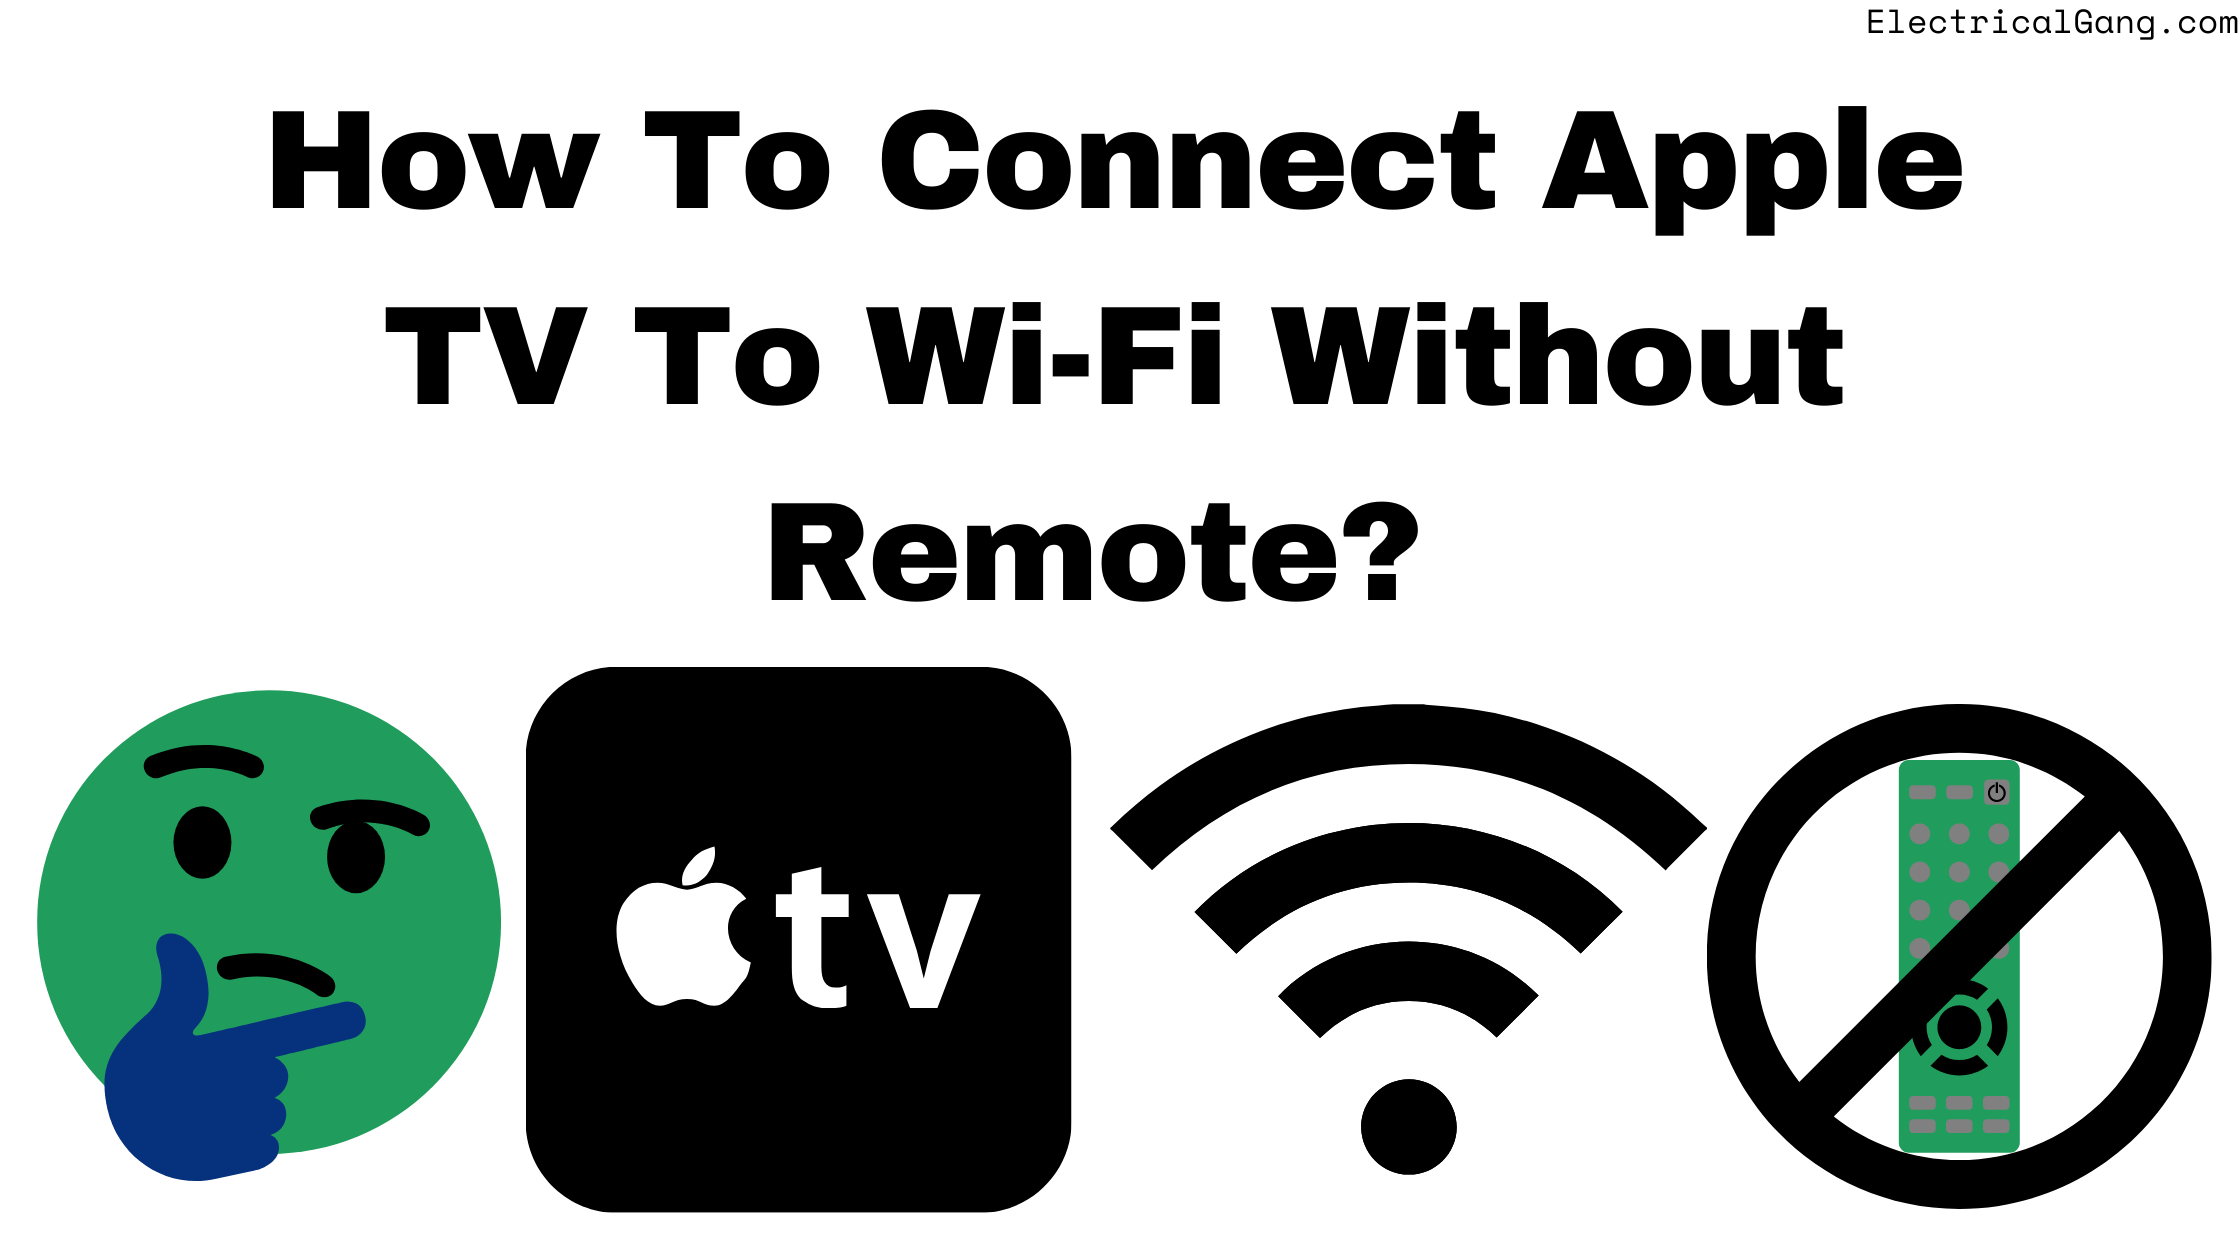 How To Connect Apple TV To Wi-Fi Without